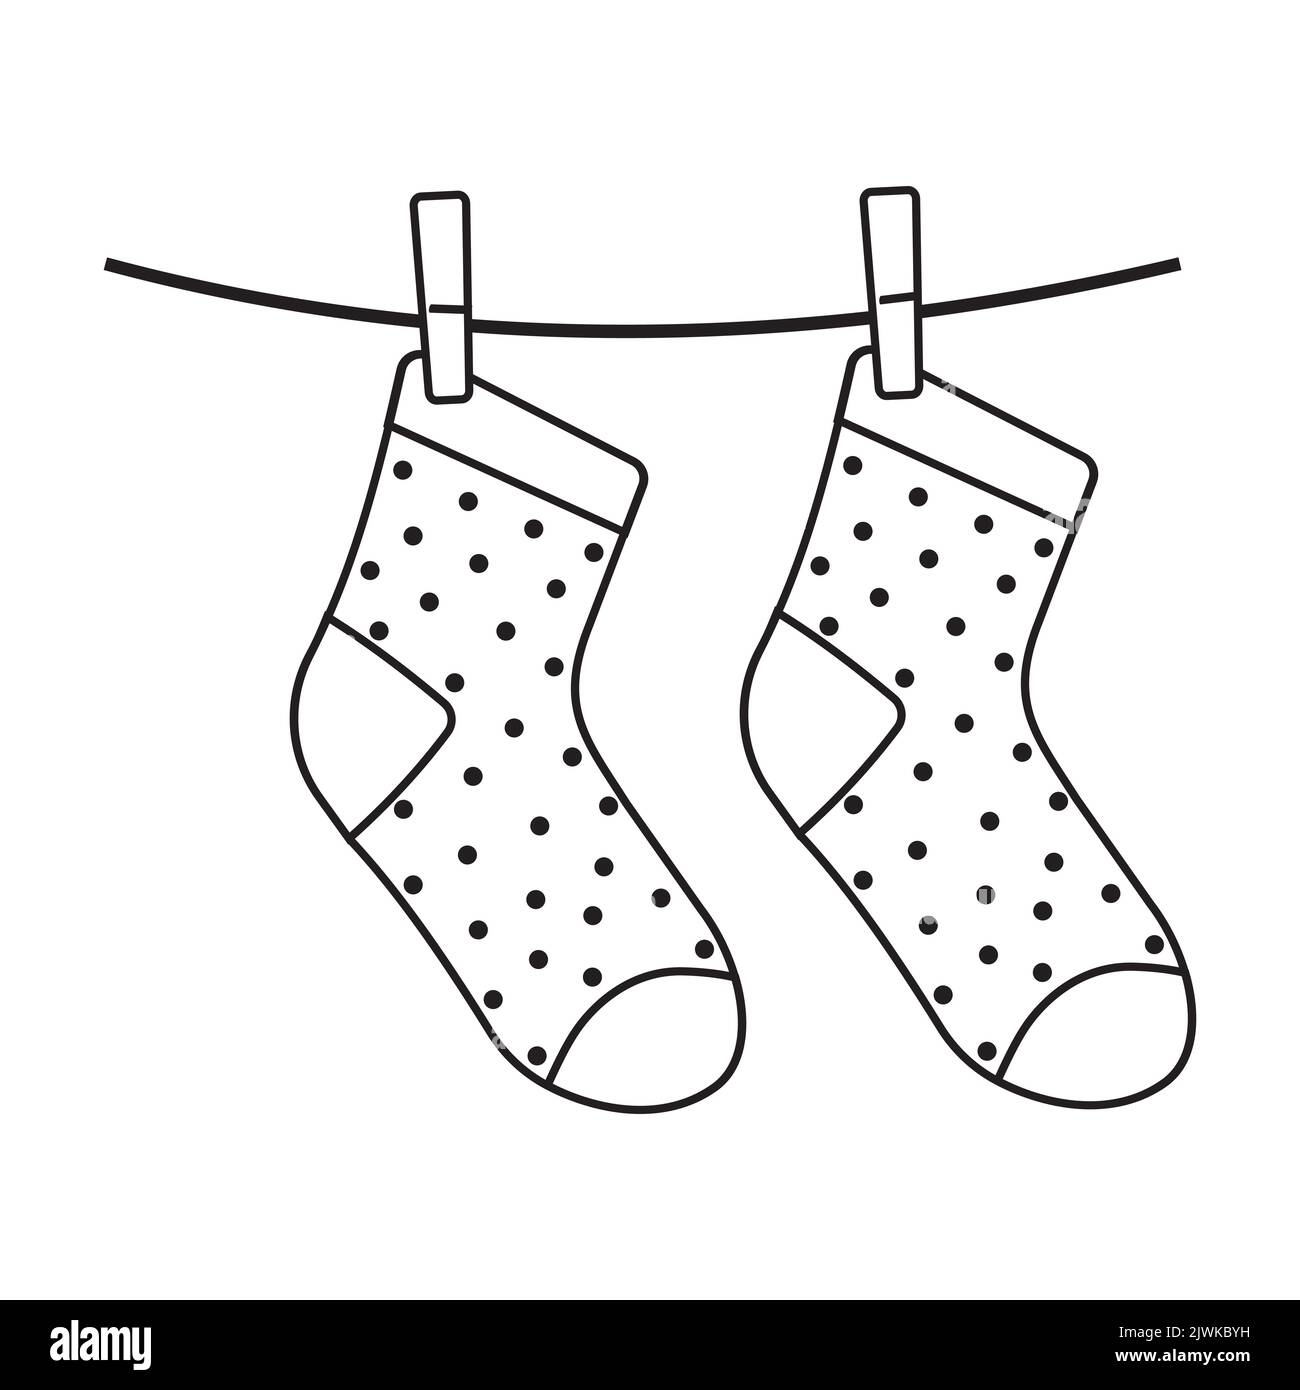 Crazy socks Black and White Stock Photos & Images - Alamy